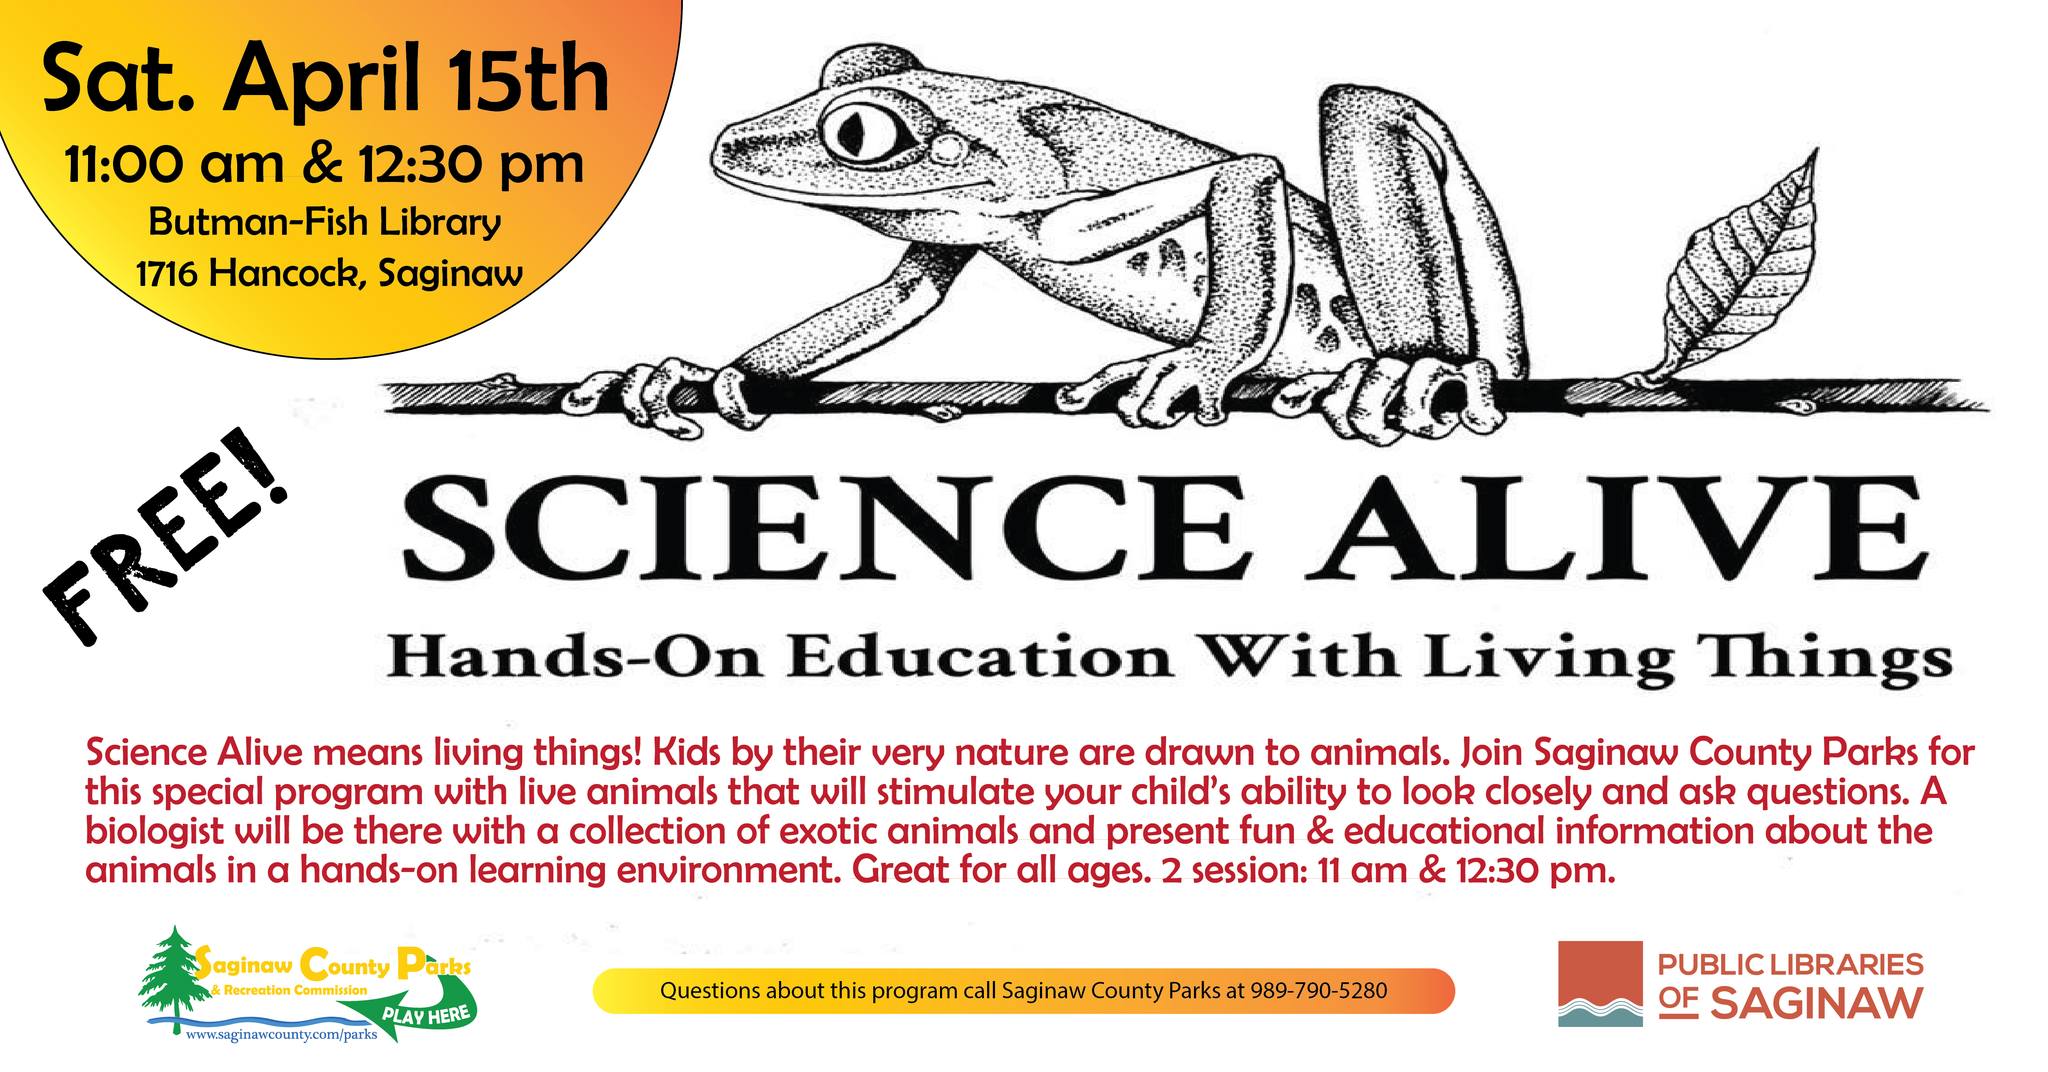 Free Science Alive event for kids with living animals